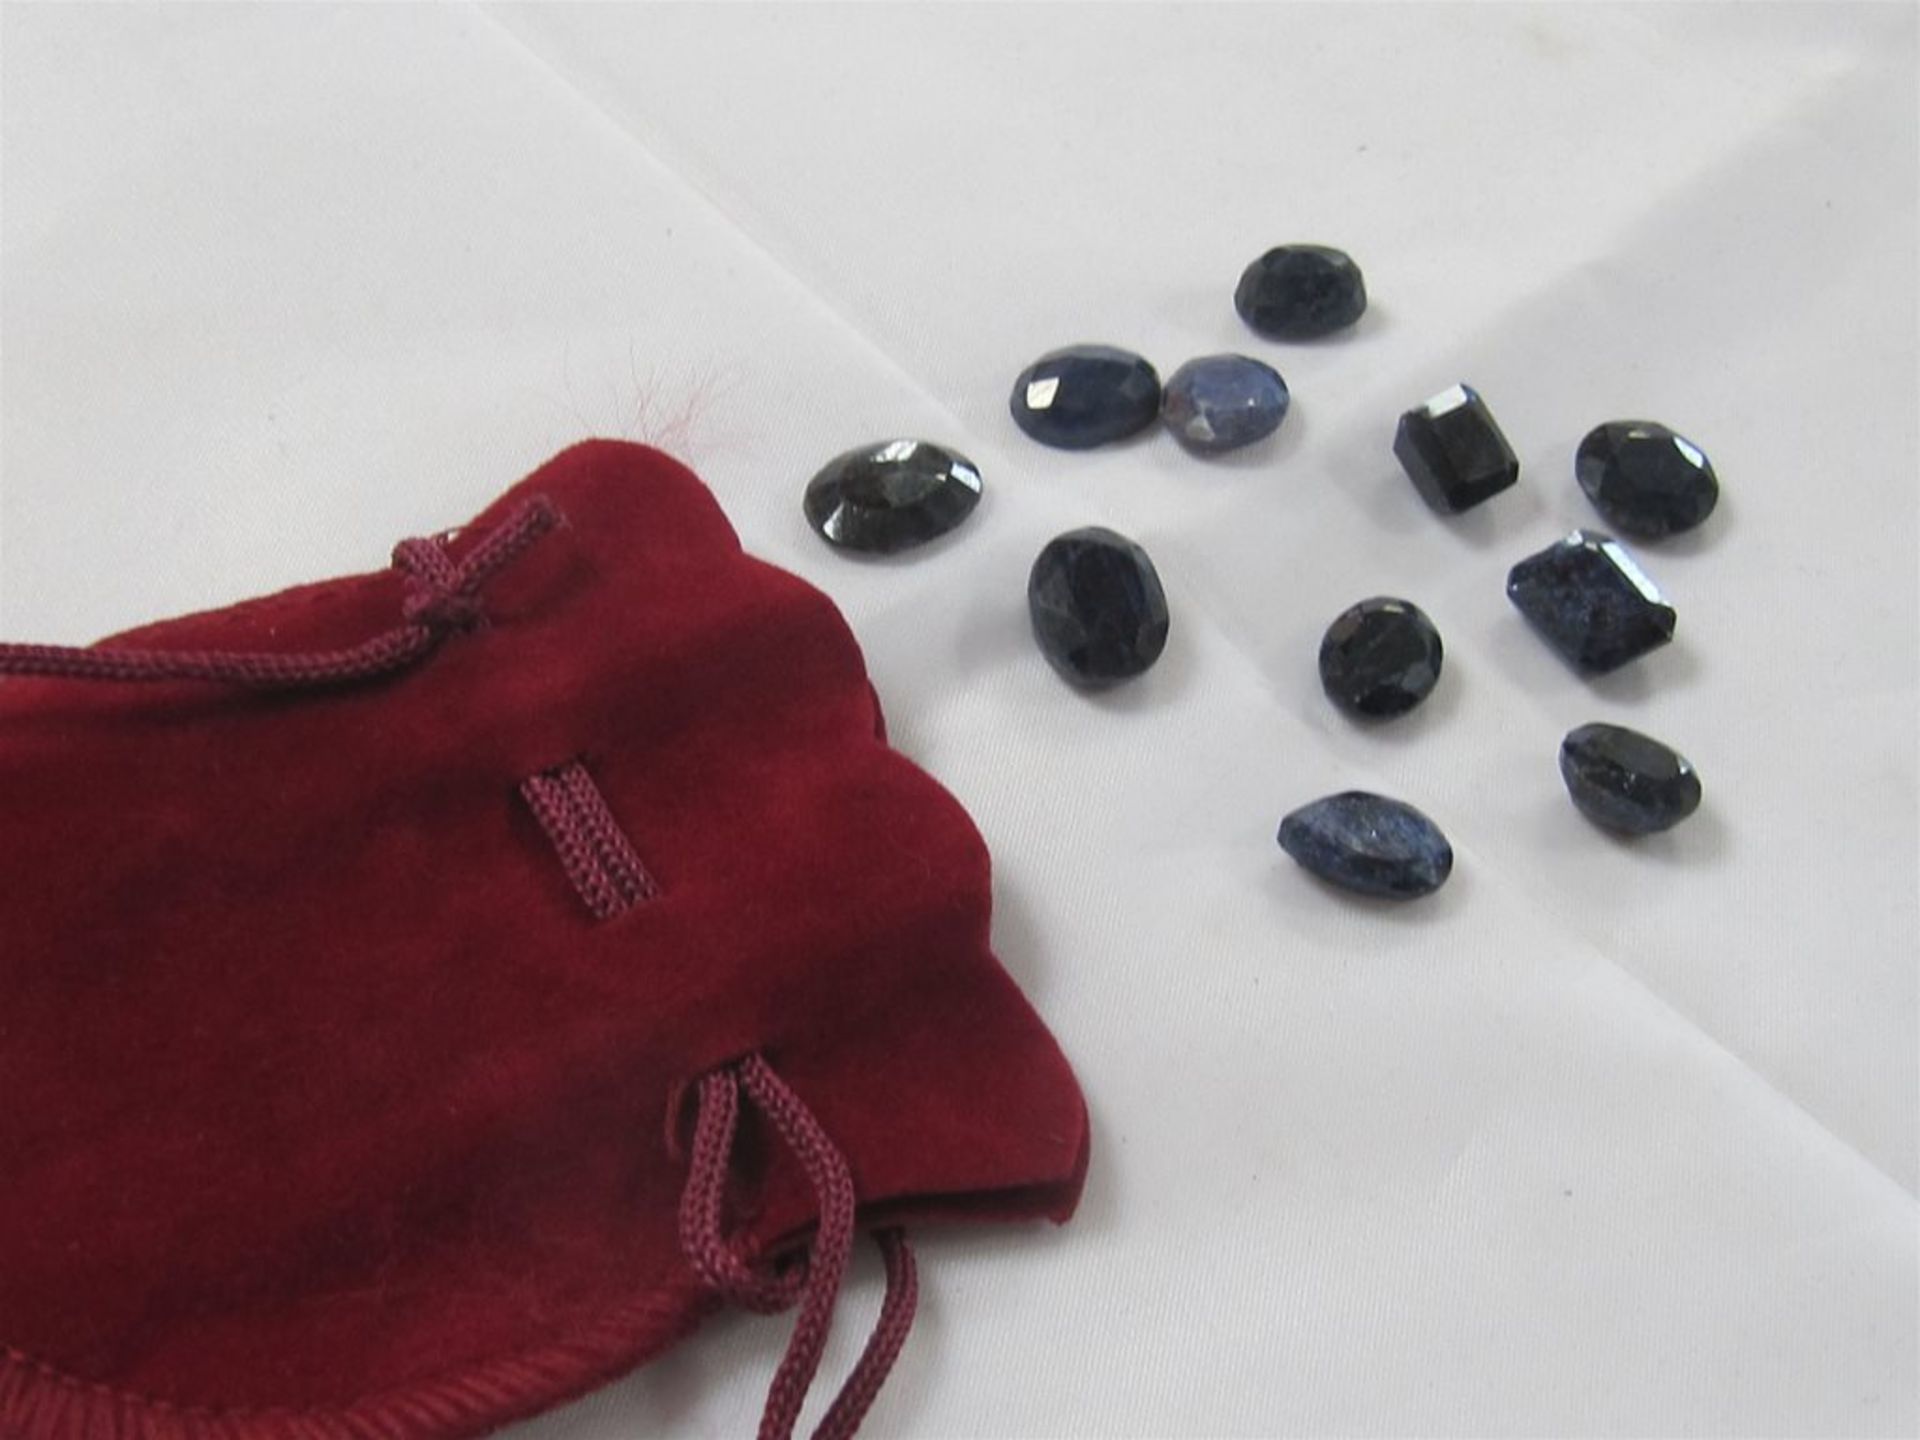 Loose Vintage Natural Sapphires. (Ref 1) Free Shipping when you Win 2 Lots or more. - Image 4 of 4